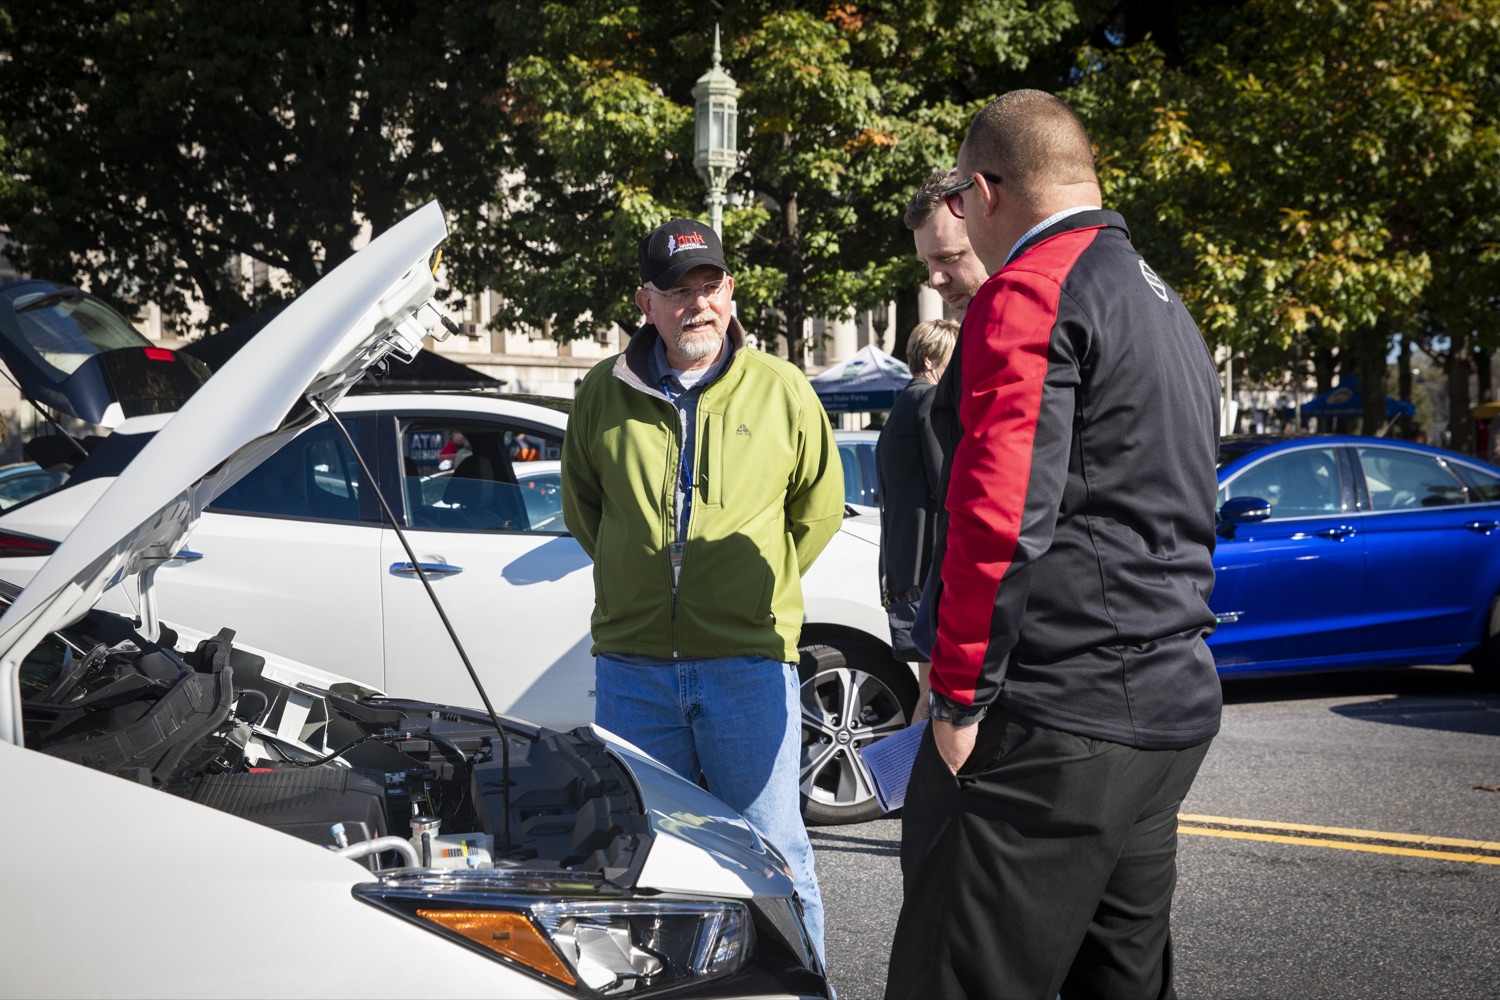 Members of the public are invited to test out electric and hybrid vehicles during a Ride & Drive Event at the Capitol Complex on October 23, 2019.<br><a href="https://filesource.amperwave.net/commonwealthofpa/photo/17449_DGS_DRIVE_ELECTRIC_CZ_13.JPG" target="_blank">⇣ Download Photo</a>